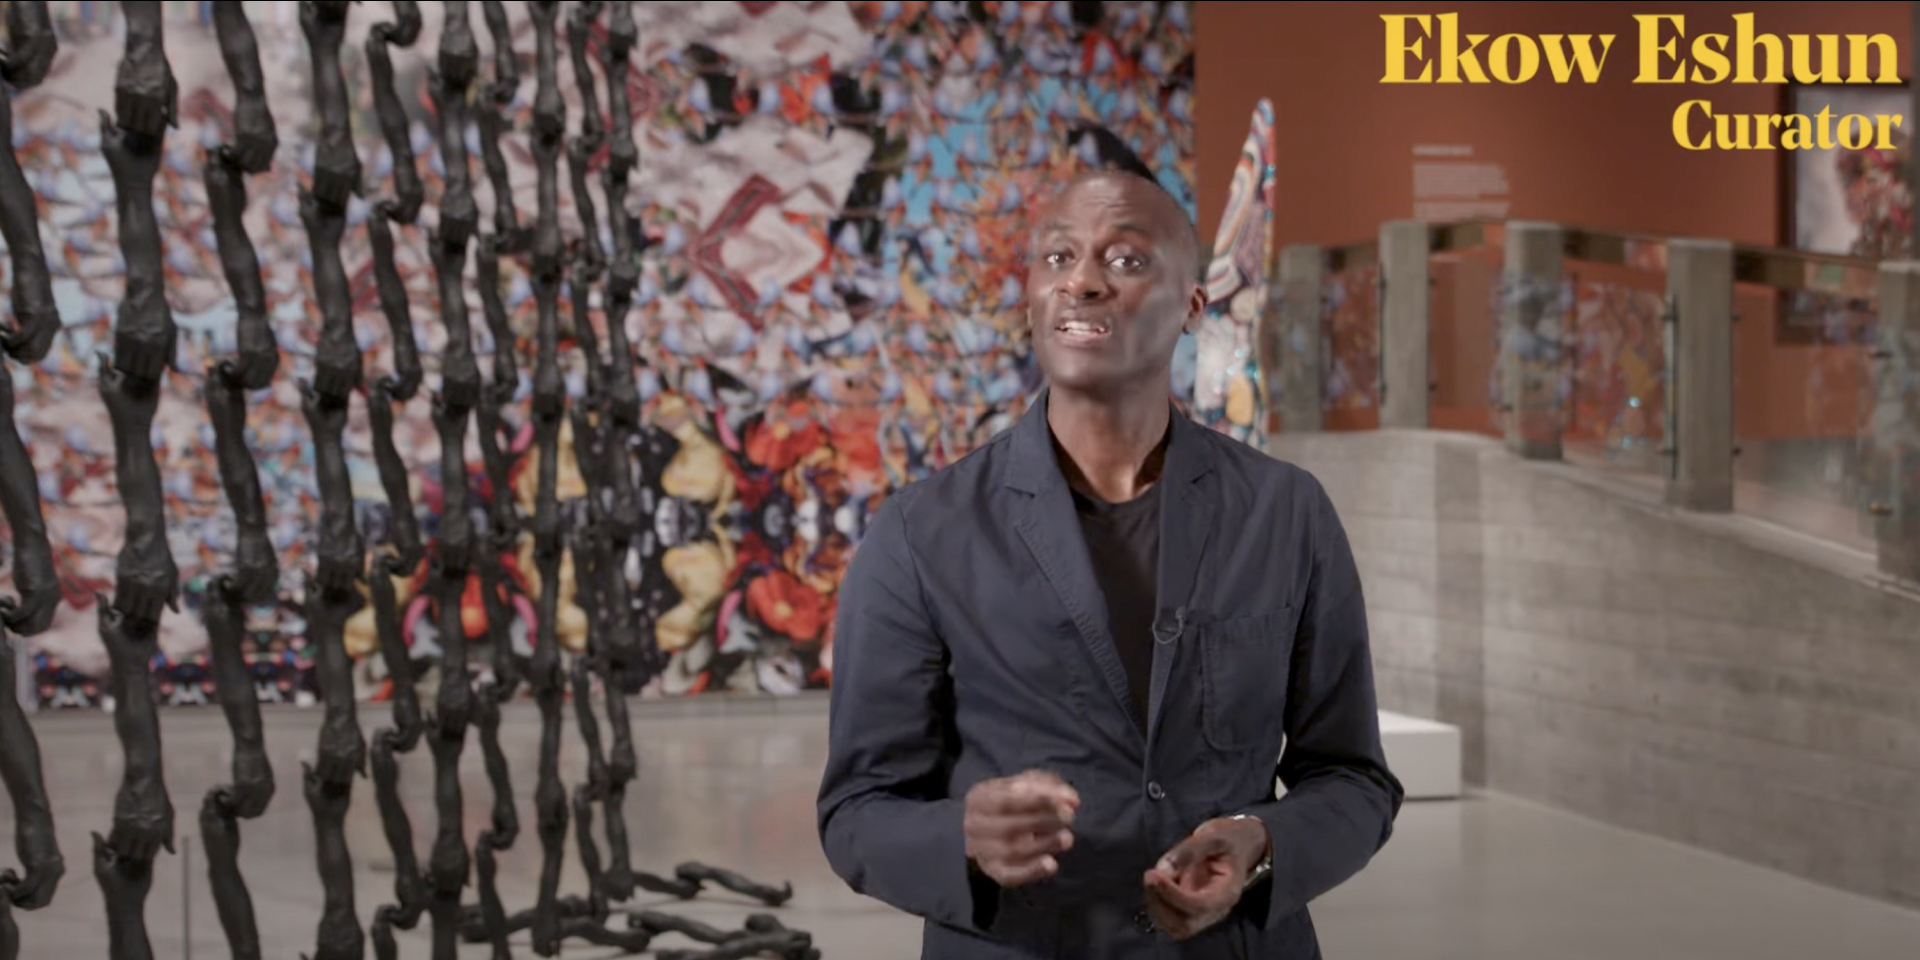 Curator Ekow Eshun at the 'In the Black Fantastic' exhibition.